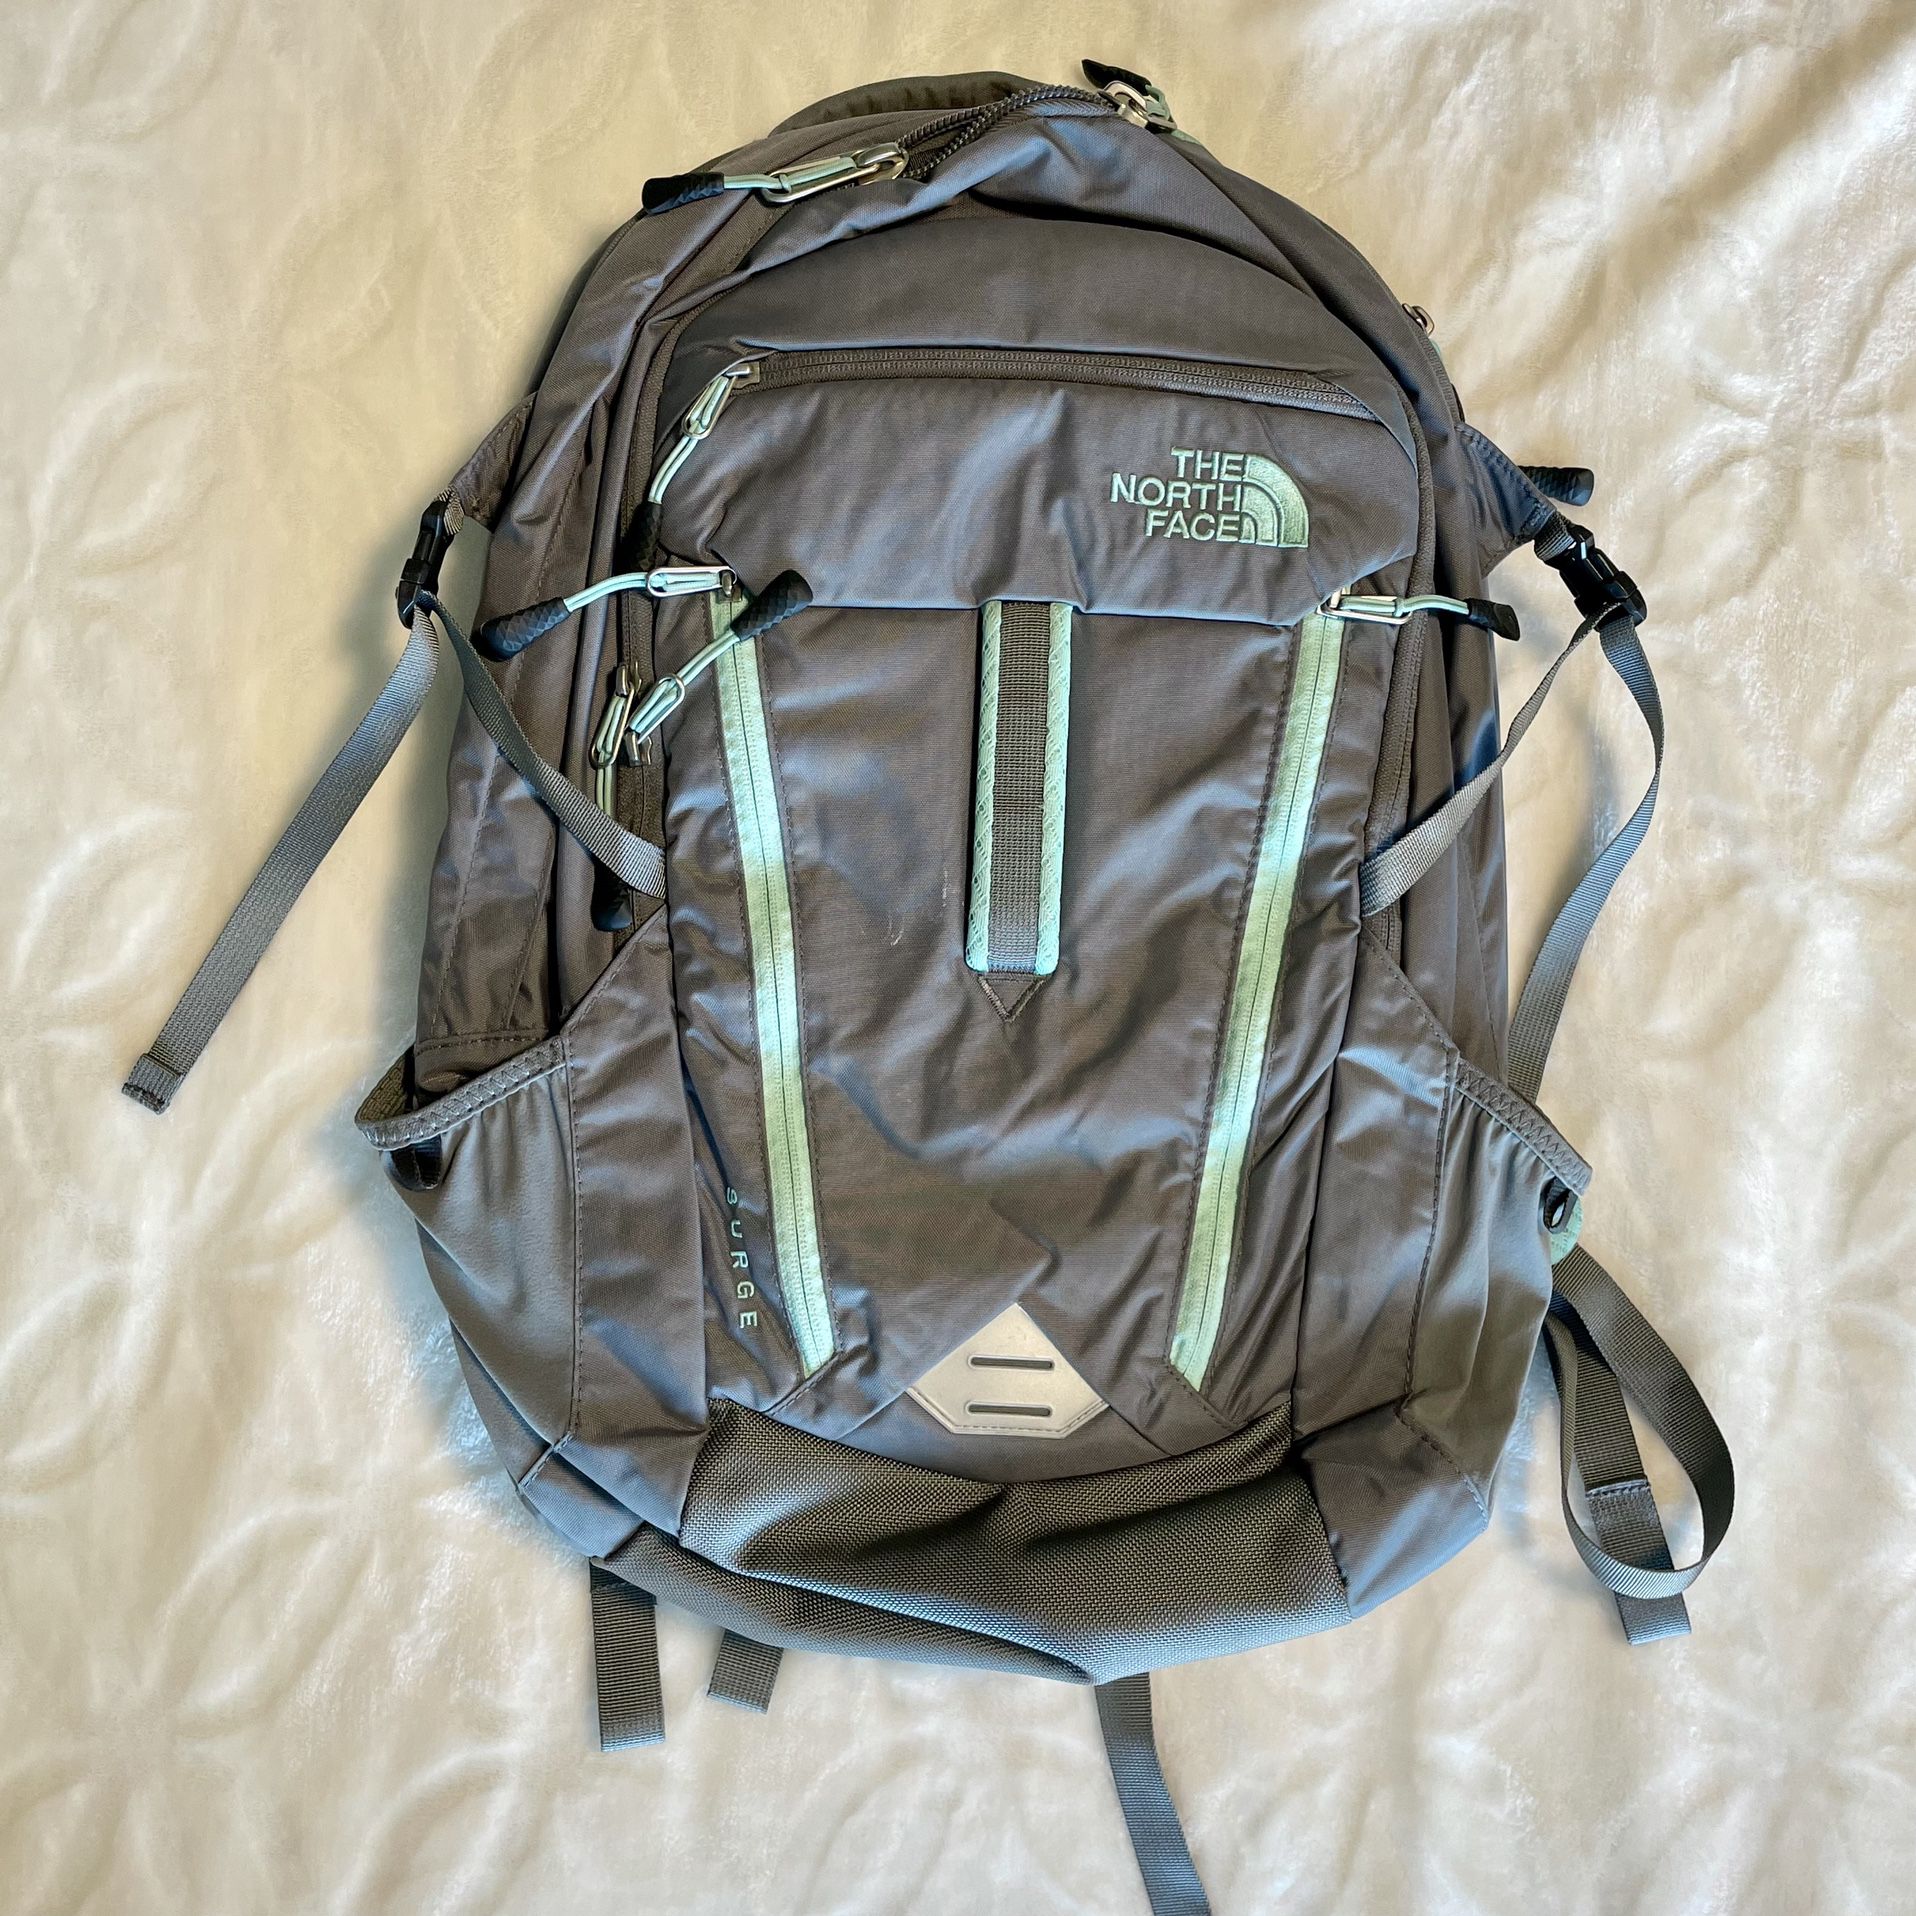 North Face Backpack - Gray And Mint Green